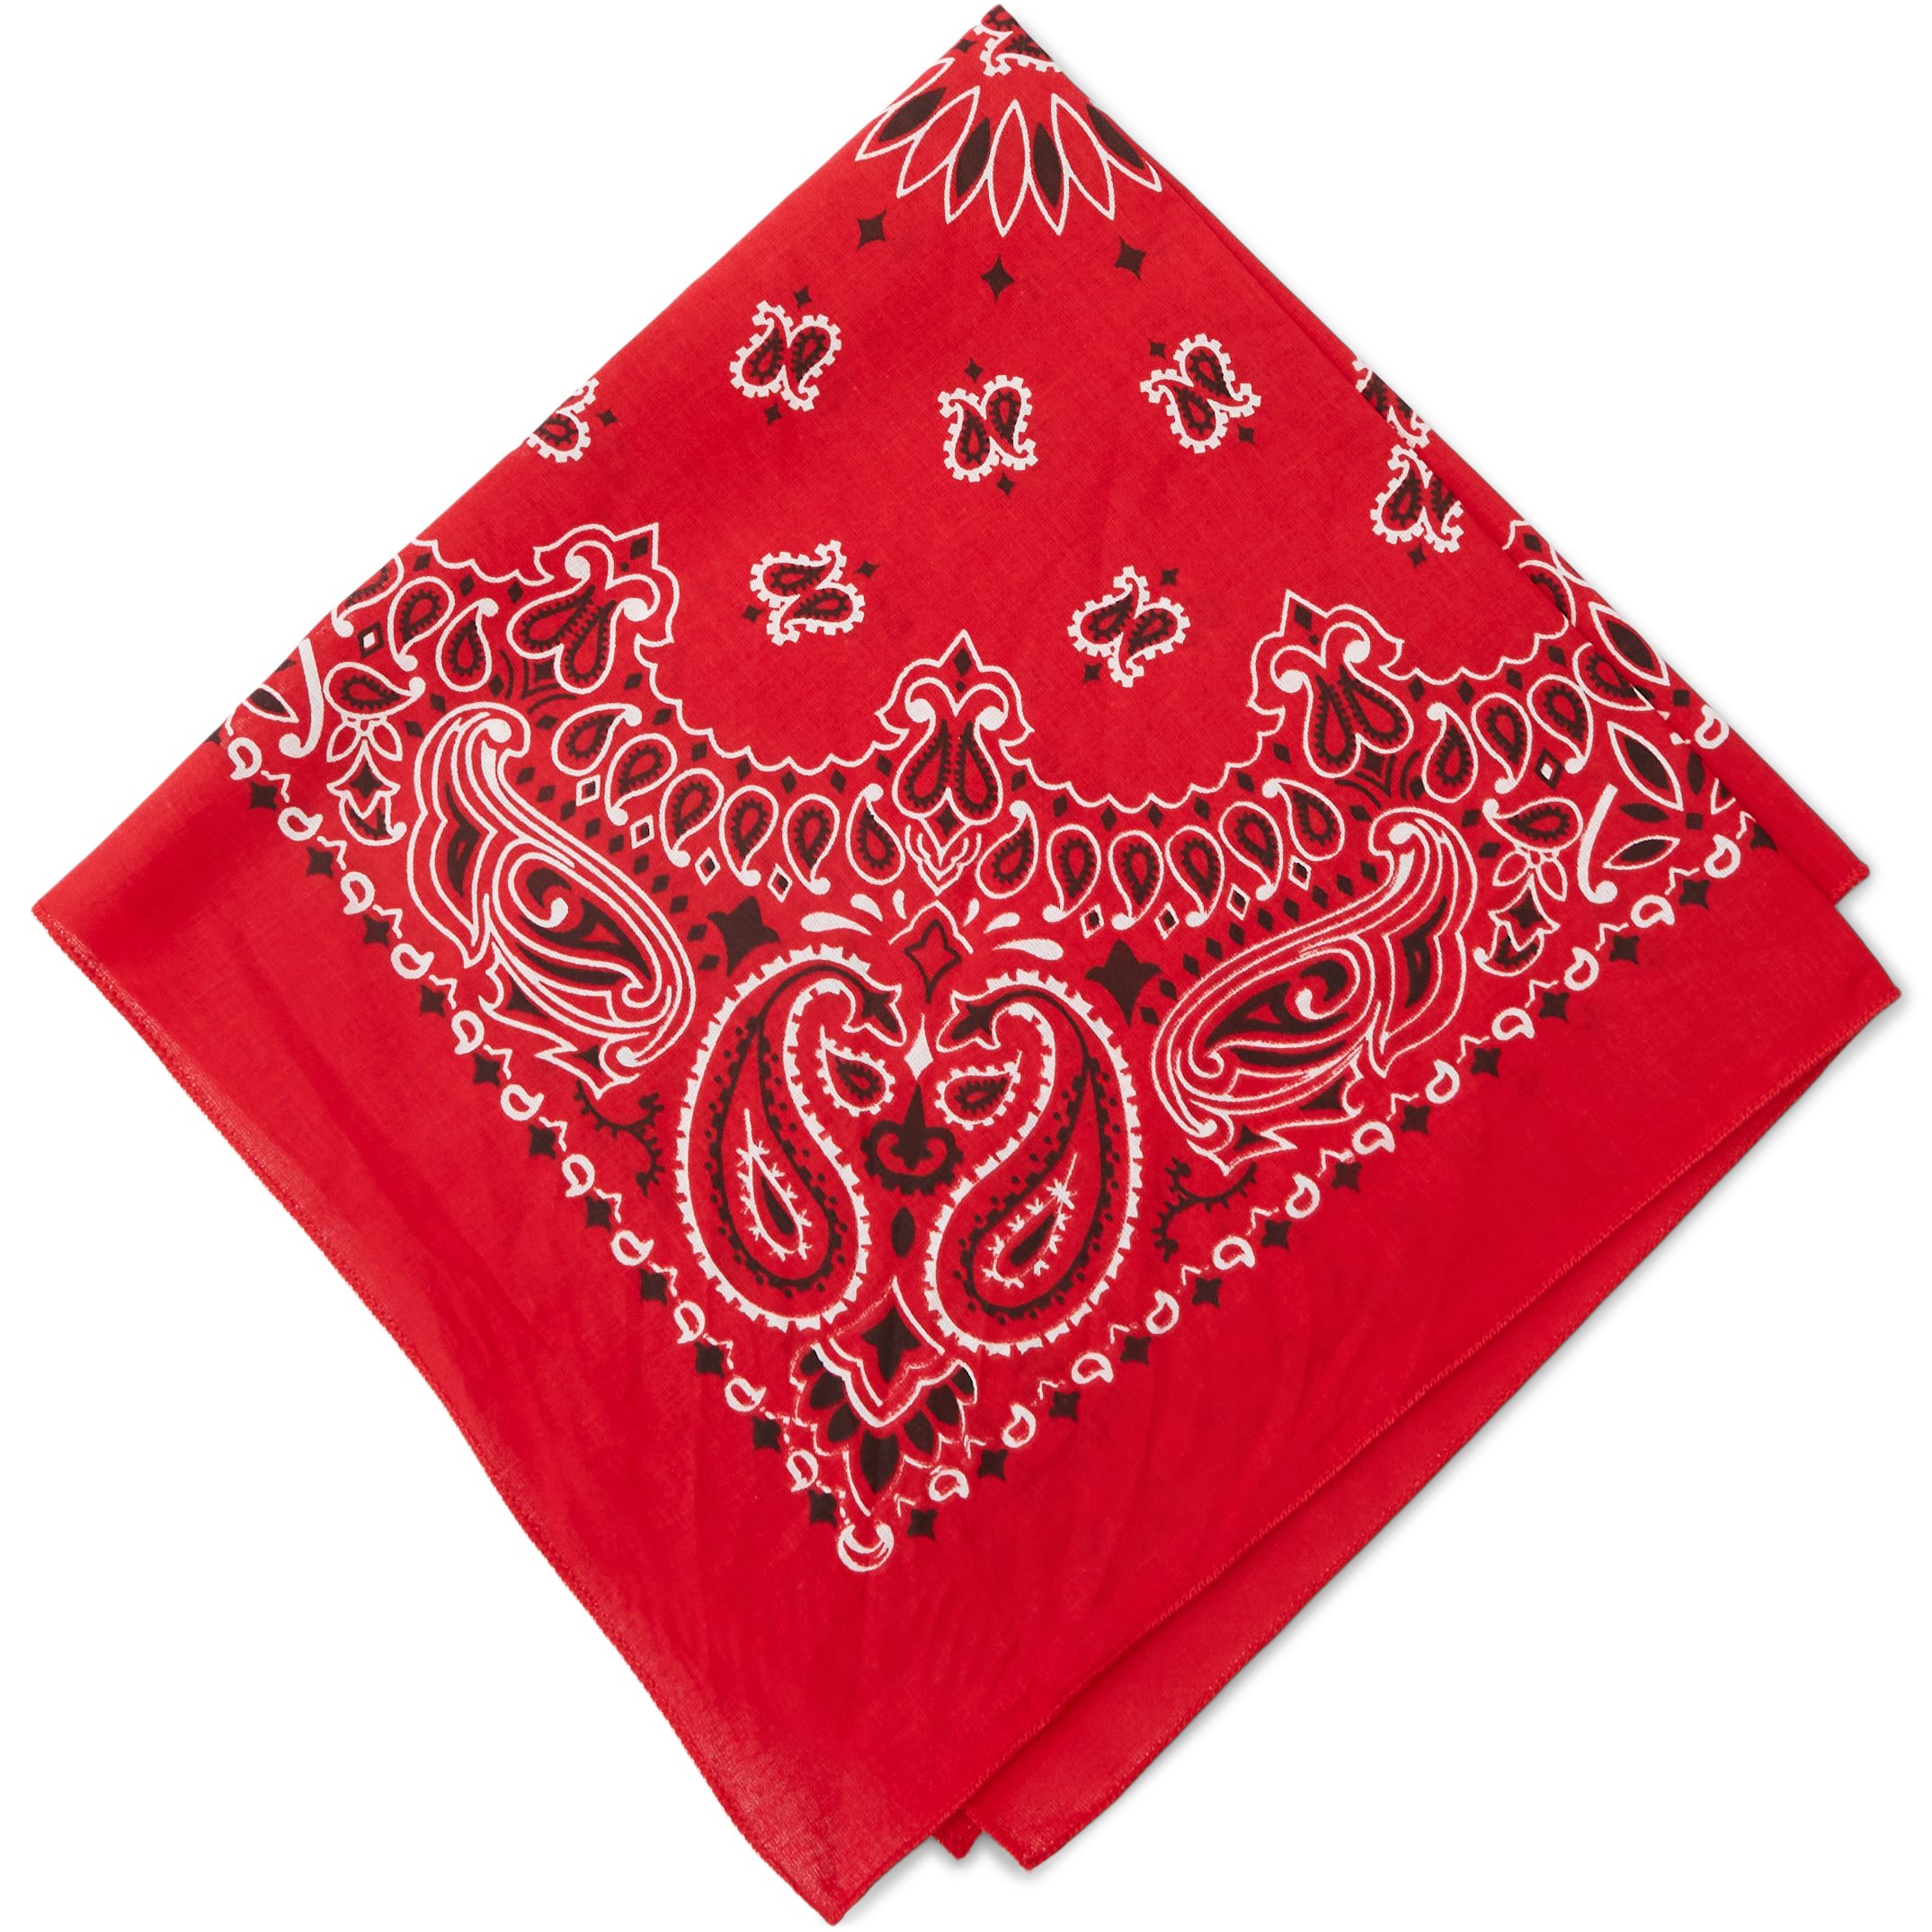 qUINT Accessories BANDANA PAISLEY Red